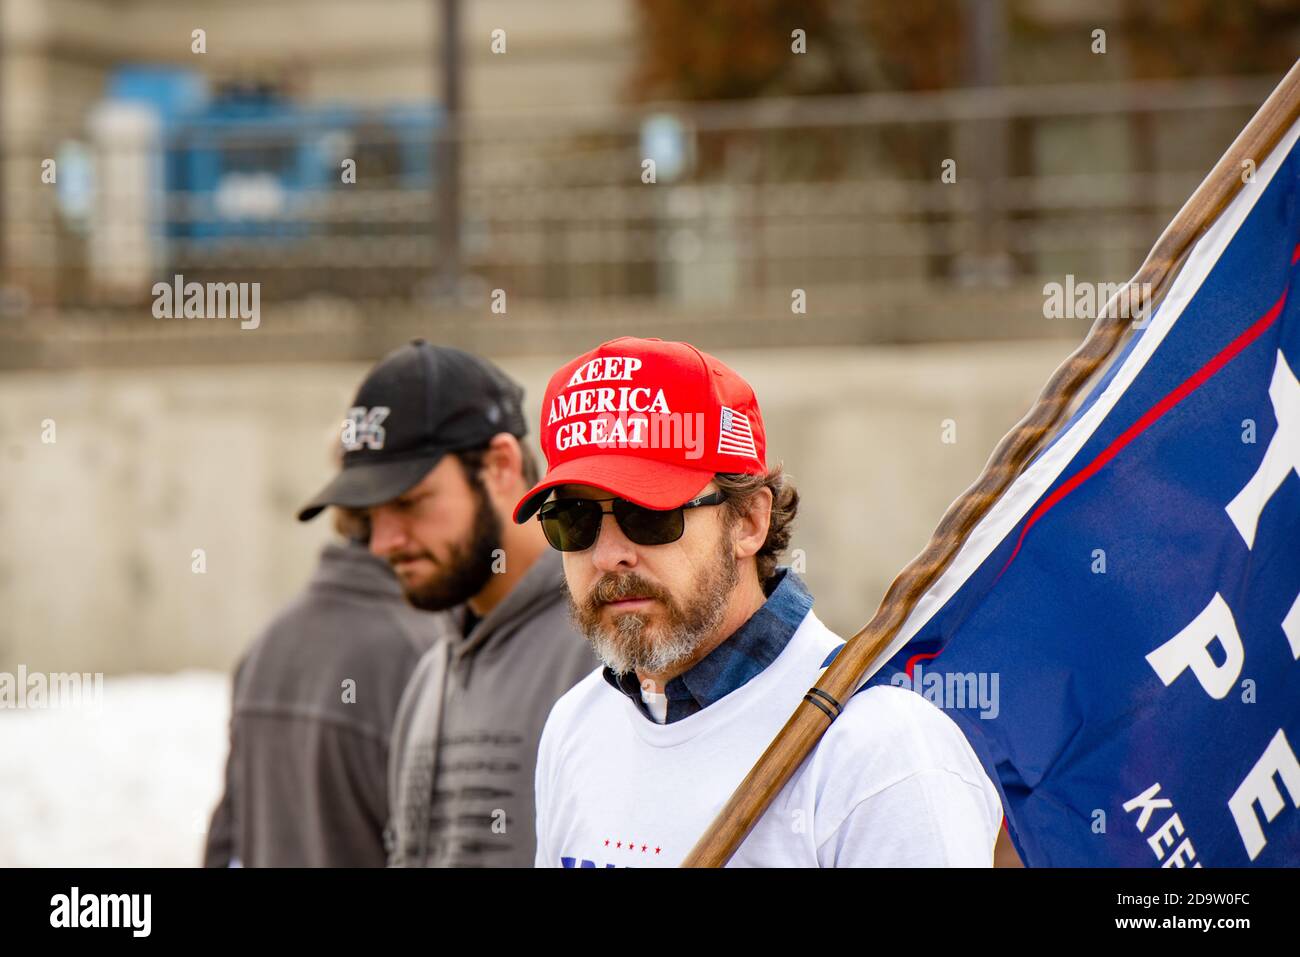 Helena, Montana / Nov 7, 2020: Pro-Trump supporter protesting at 'Stop the Steal' rally at the Capitol wearing Make America Great Again red hat agains Stock Photo